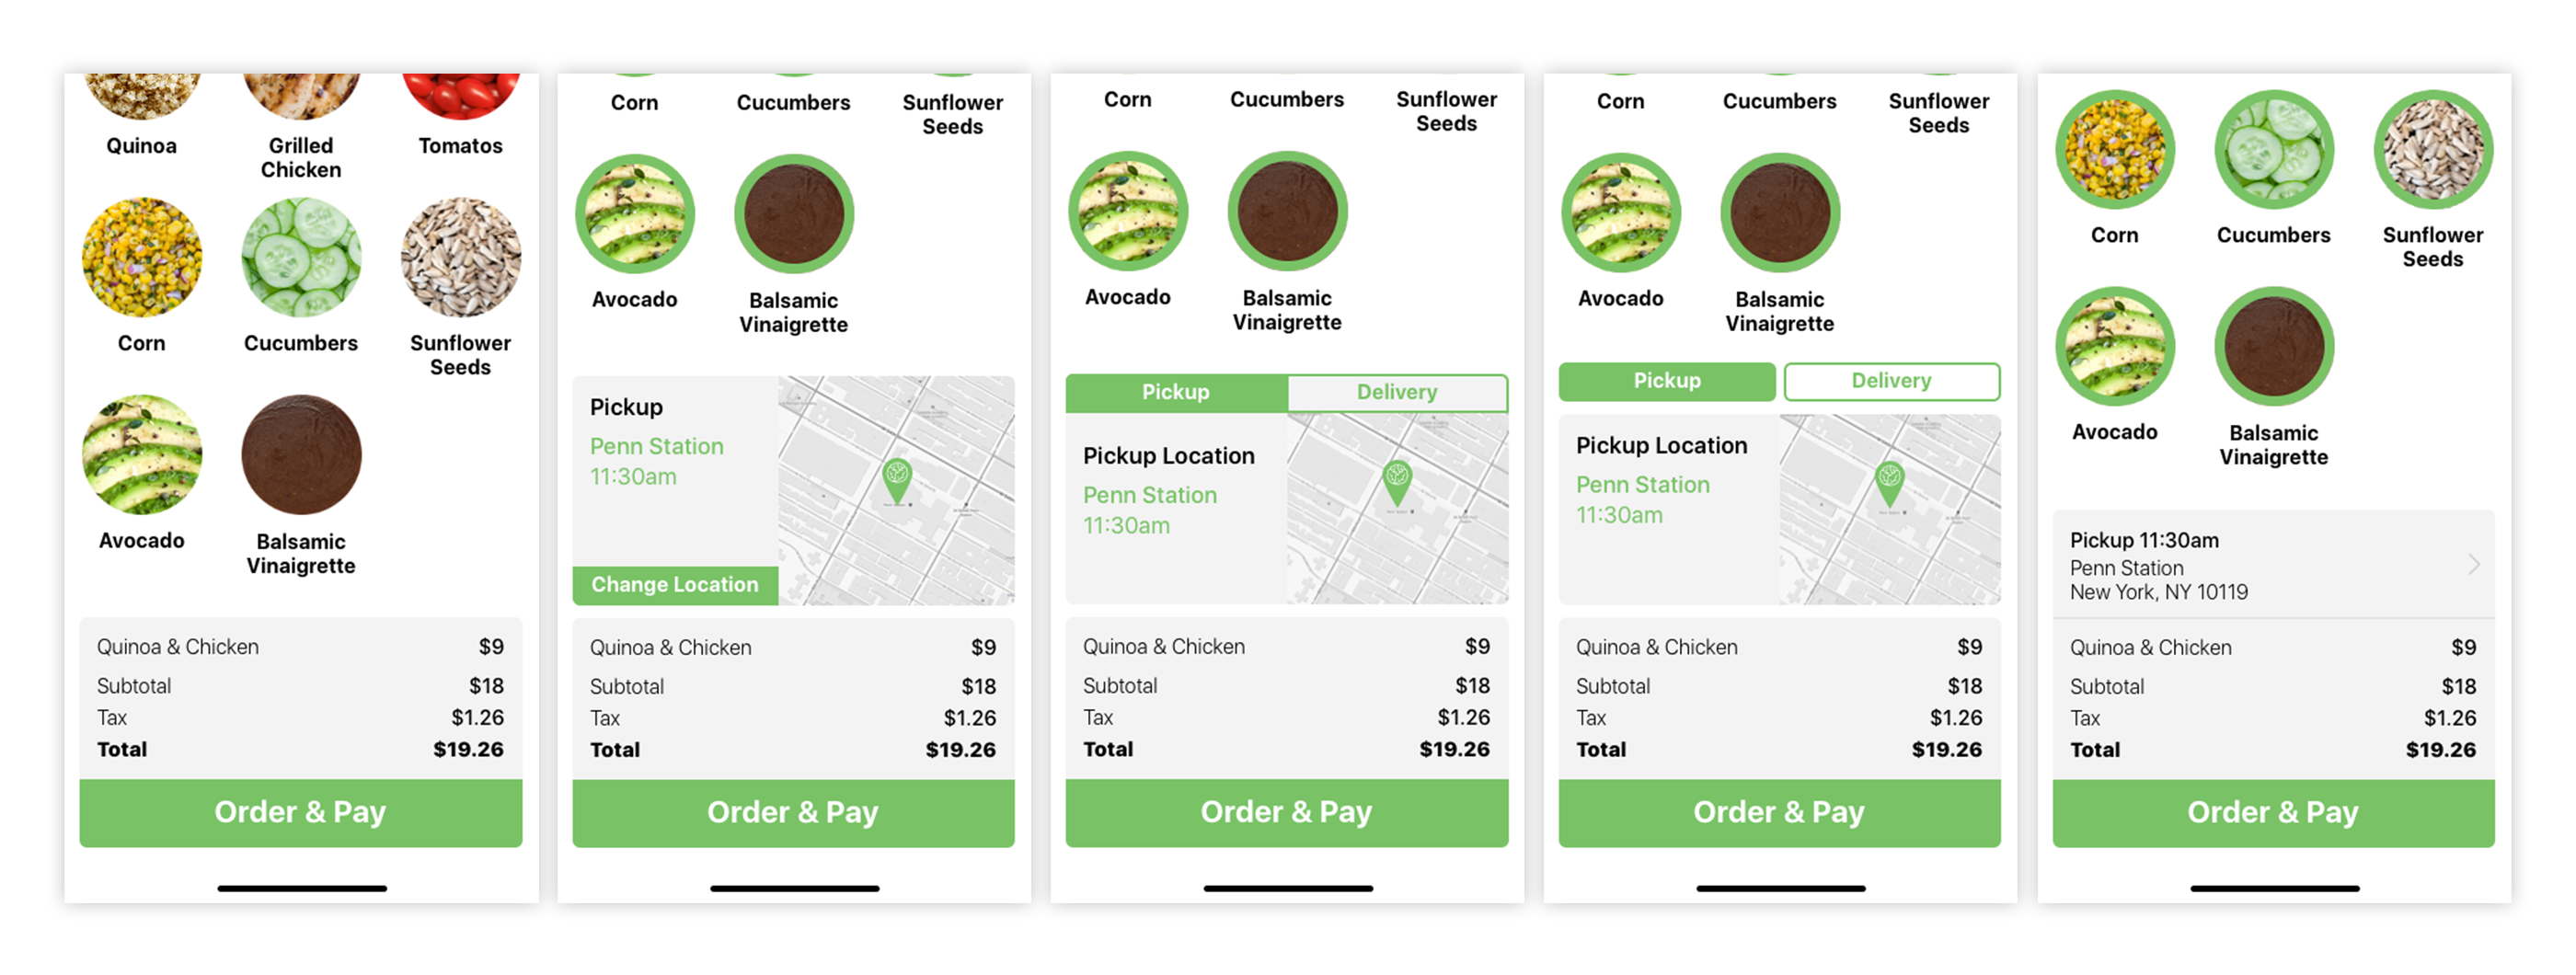 Order & Pay Card Iterations